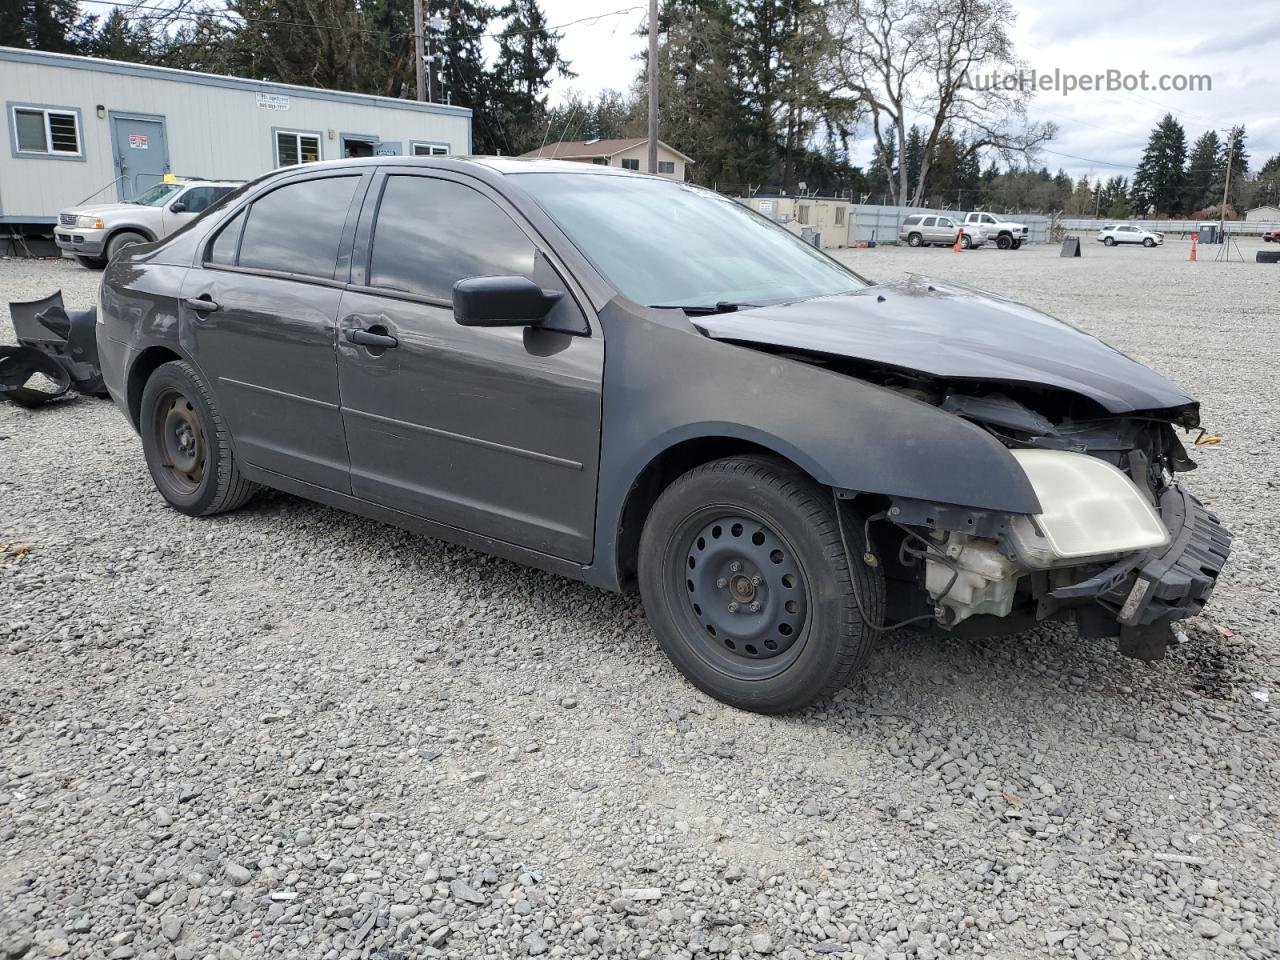 2006 Ford Fusion S Charcoal vin: 3FAFP06Z66R117334